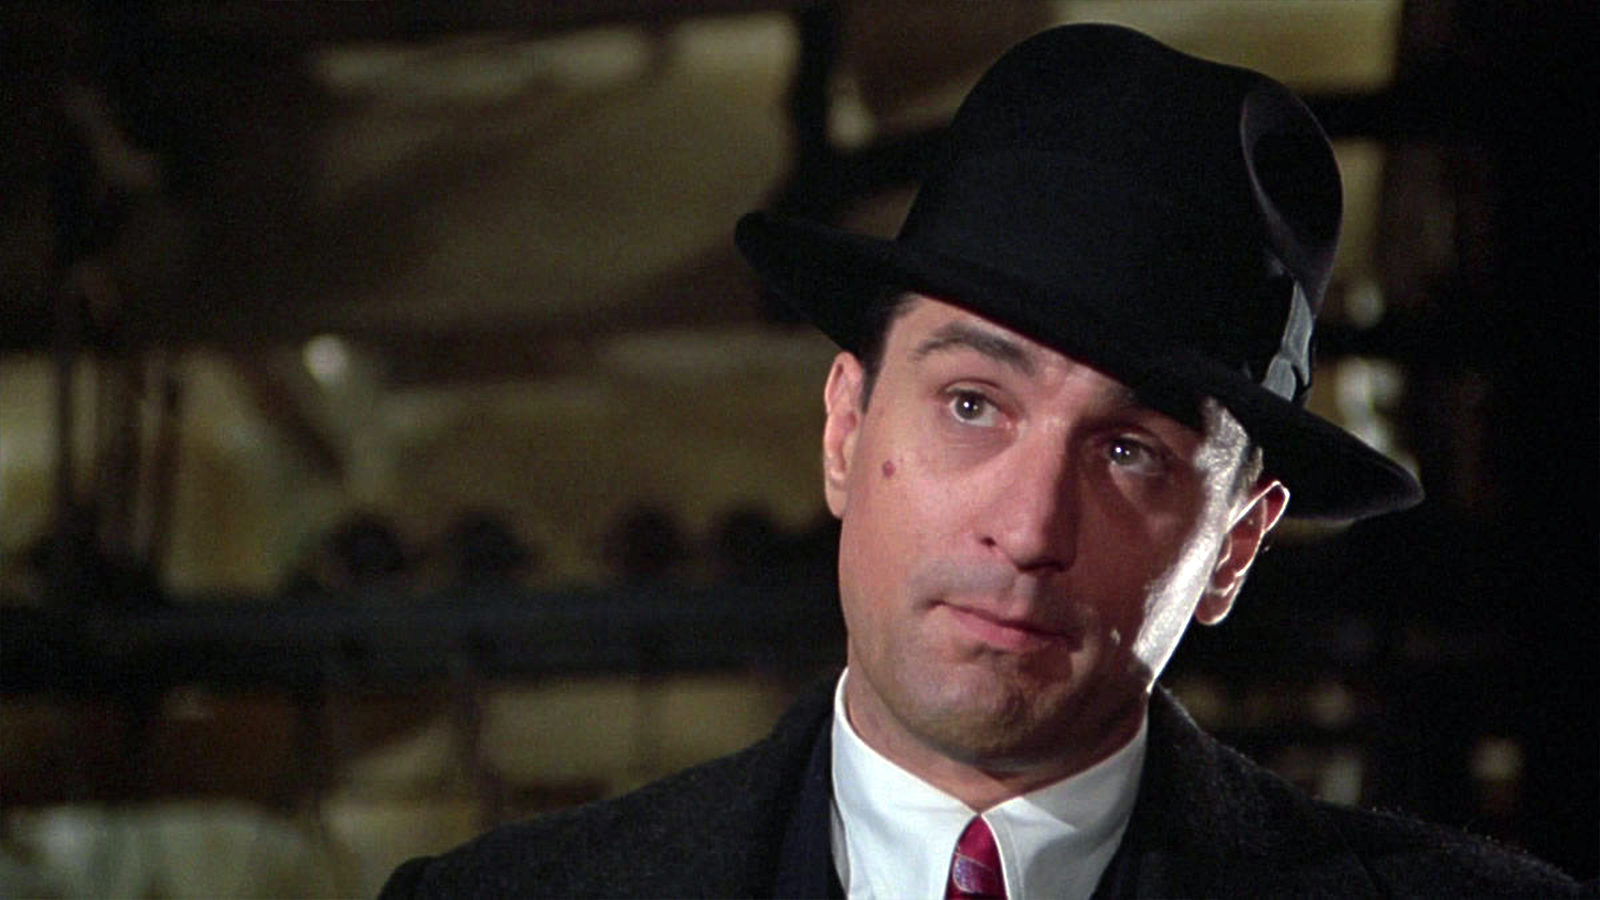 Robert De Niro in Once Upon a Time in America